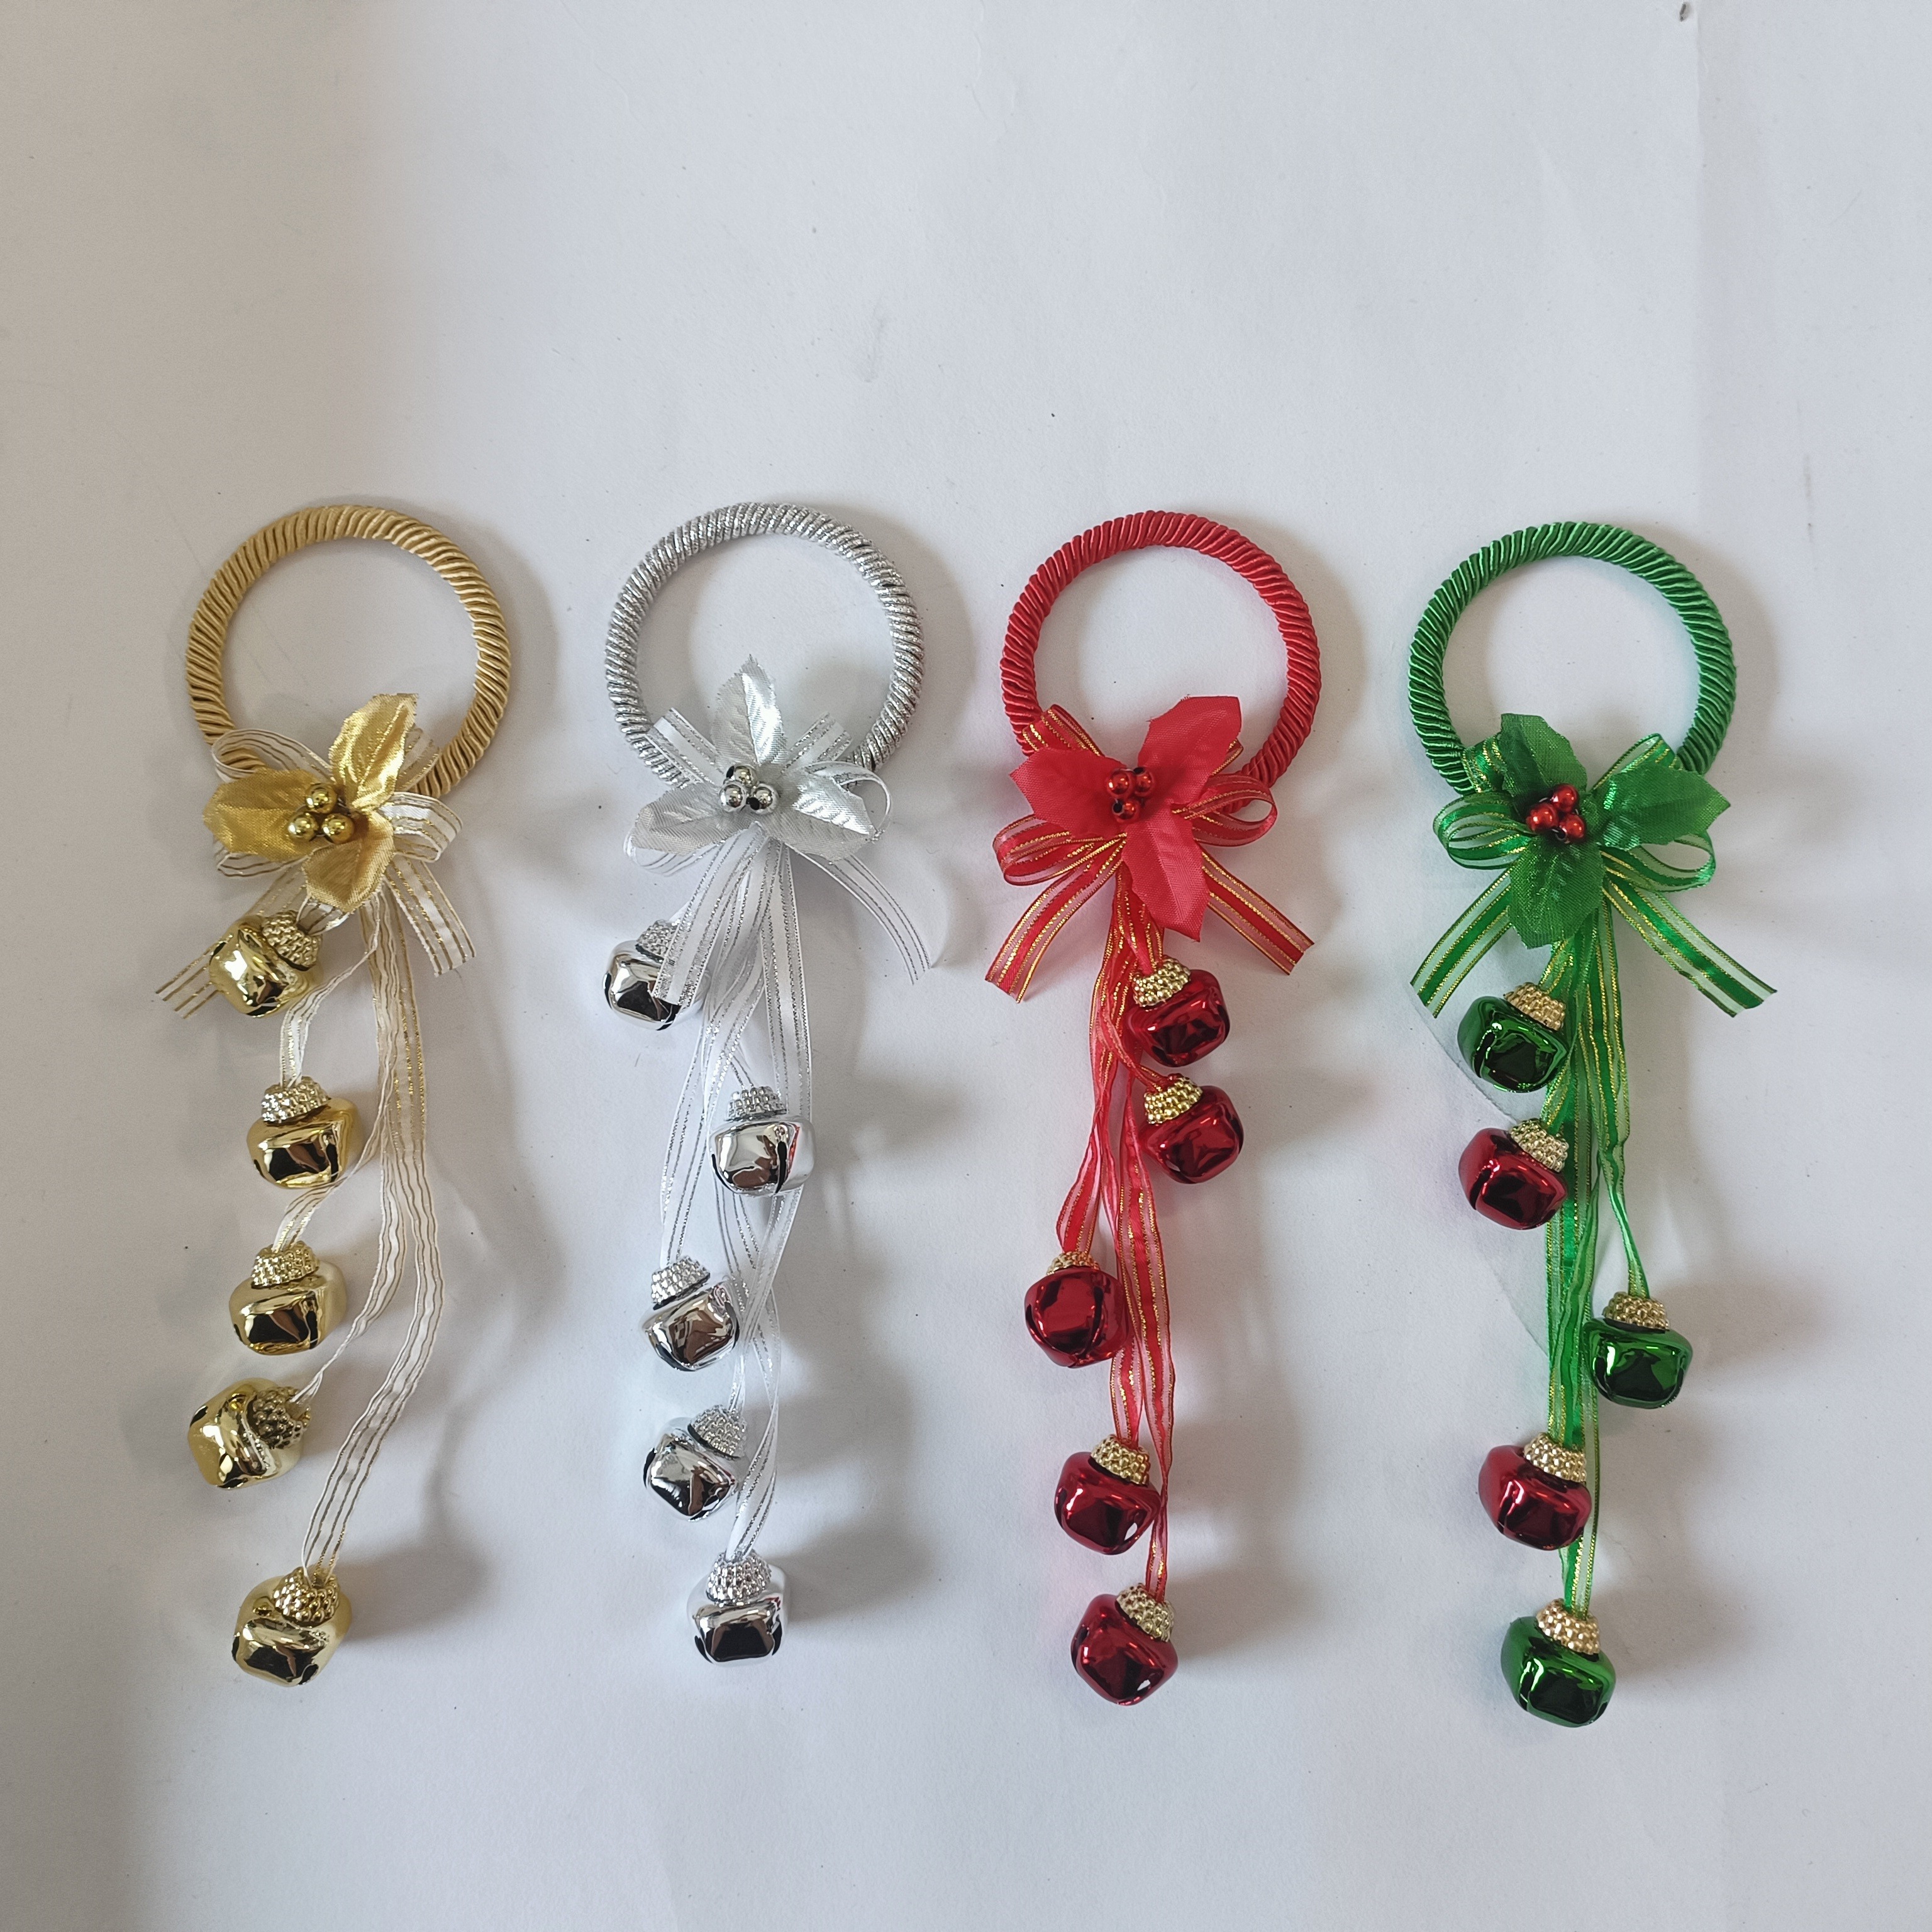 50pcs Yellow 22mm Mini Jingle Bells Keychains Decoration Accessories, Candy  Color Painted Metal Jingle Bells For Christmas Tree, Pet Collar Etc.